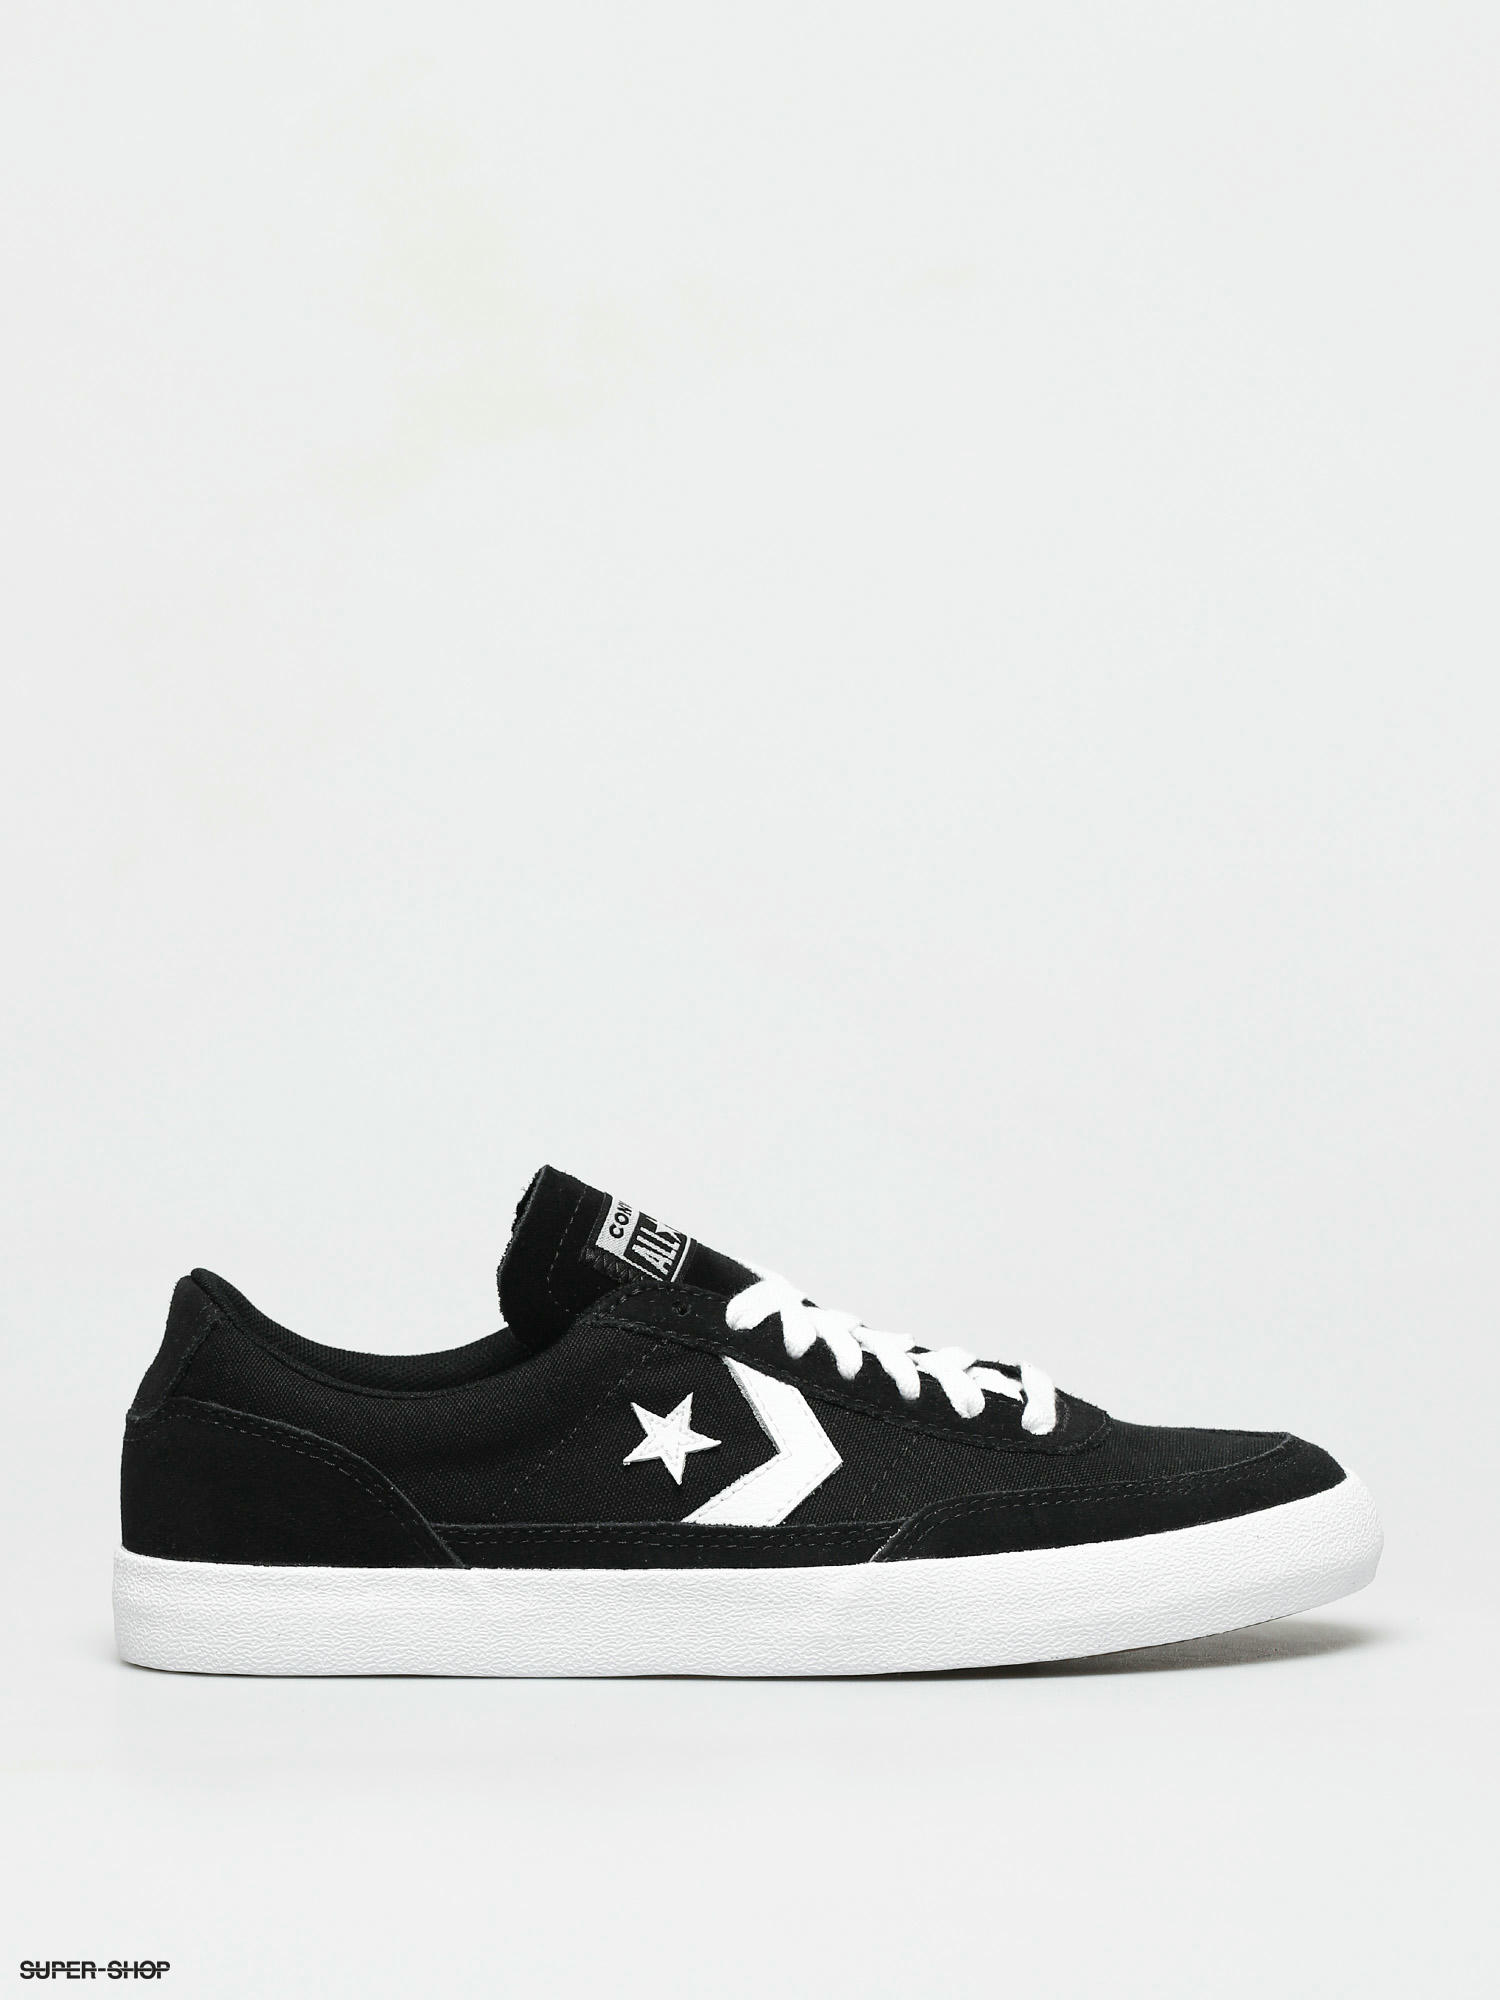 converse black and white sneakers